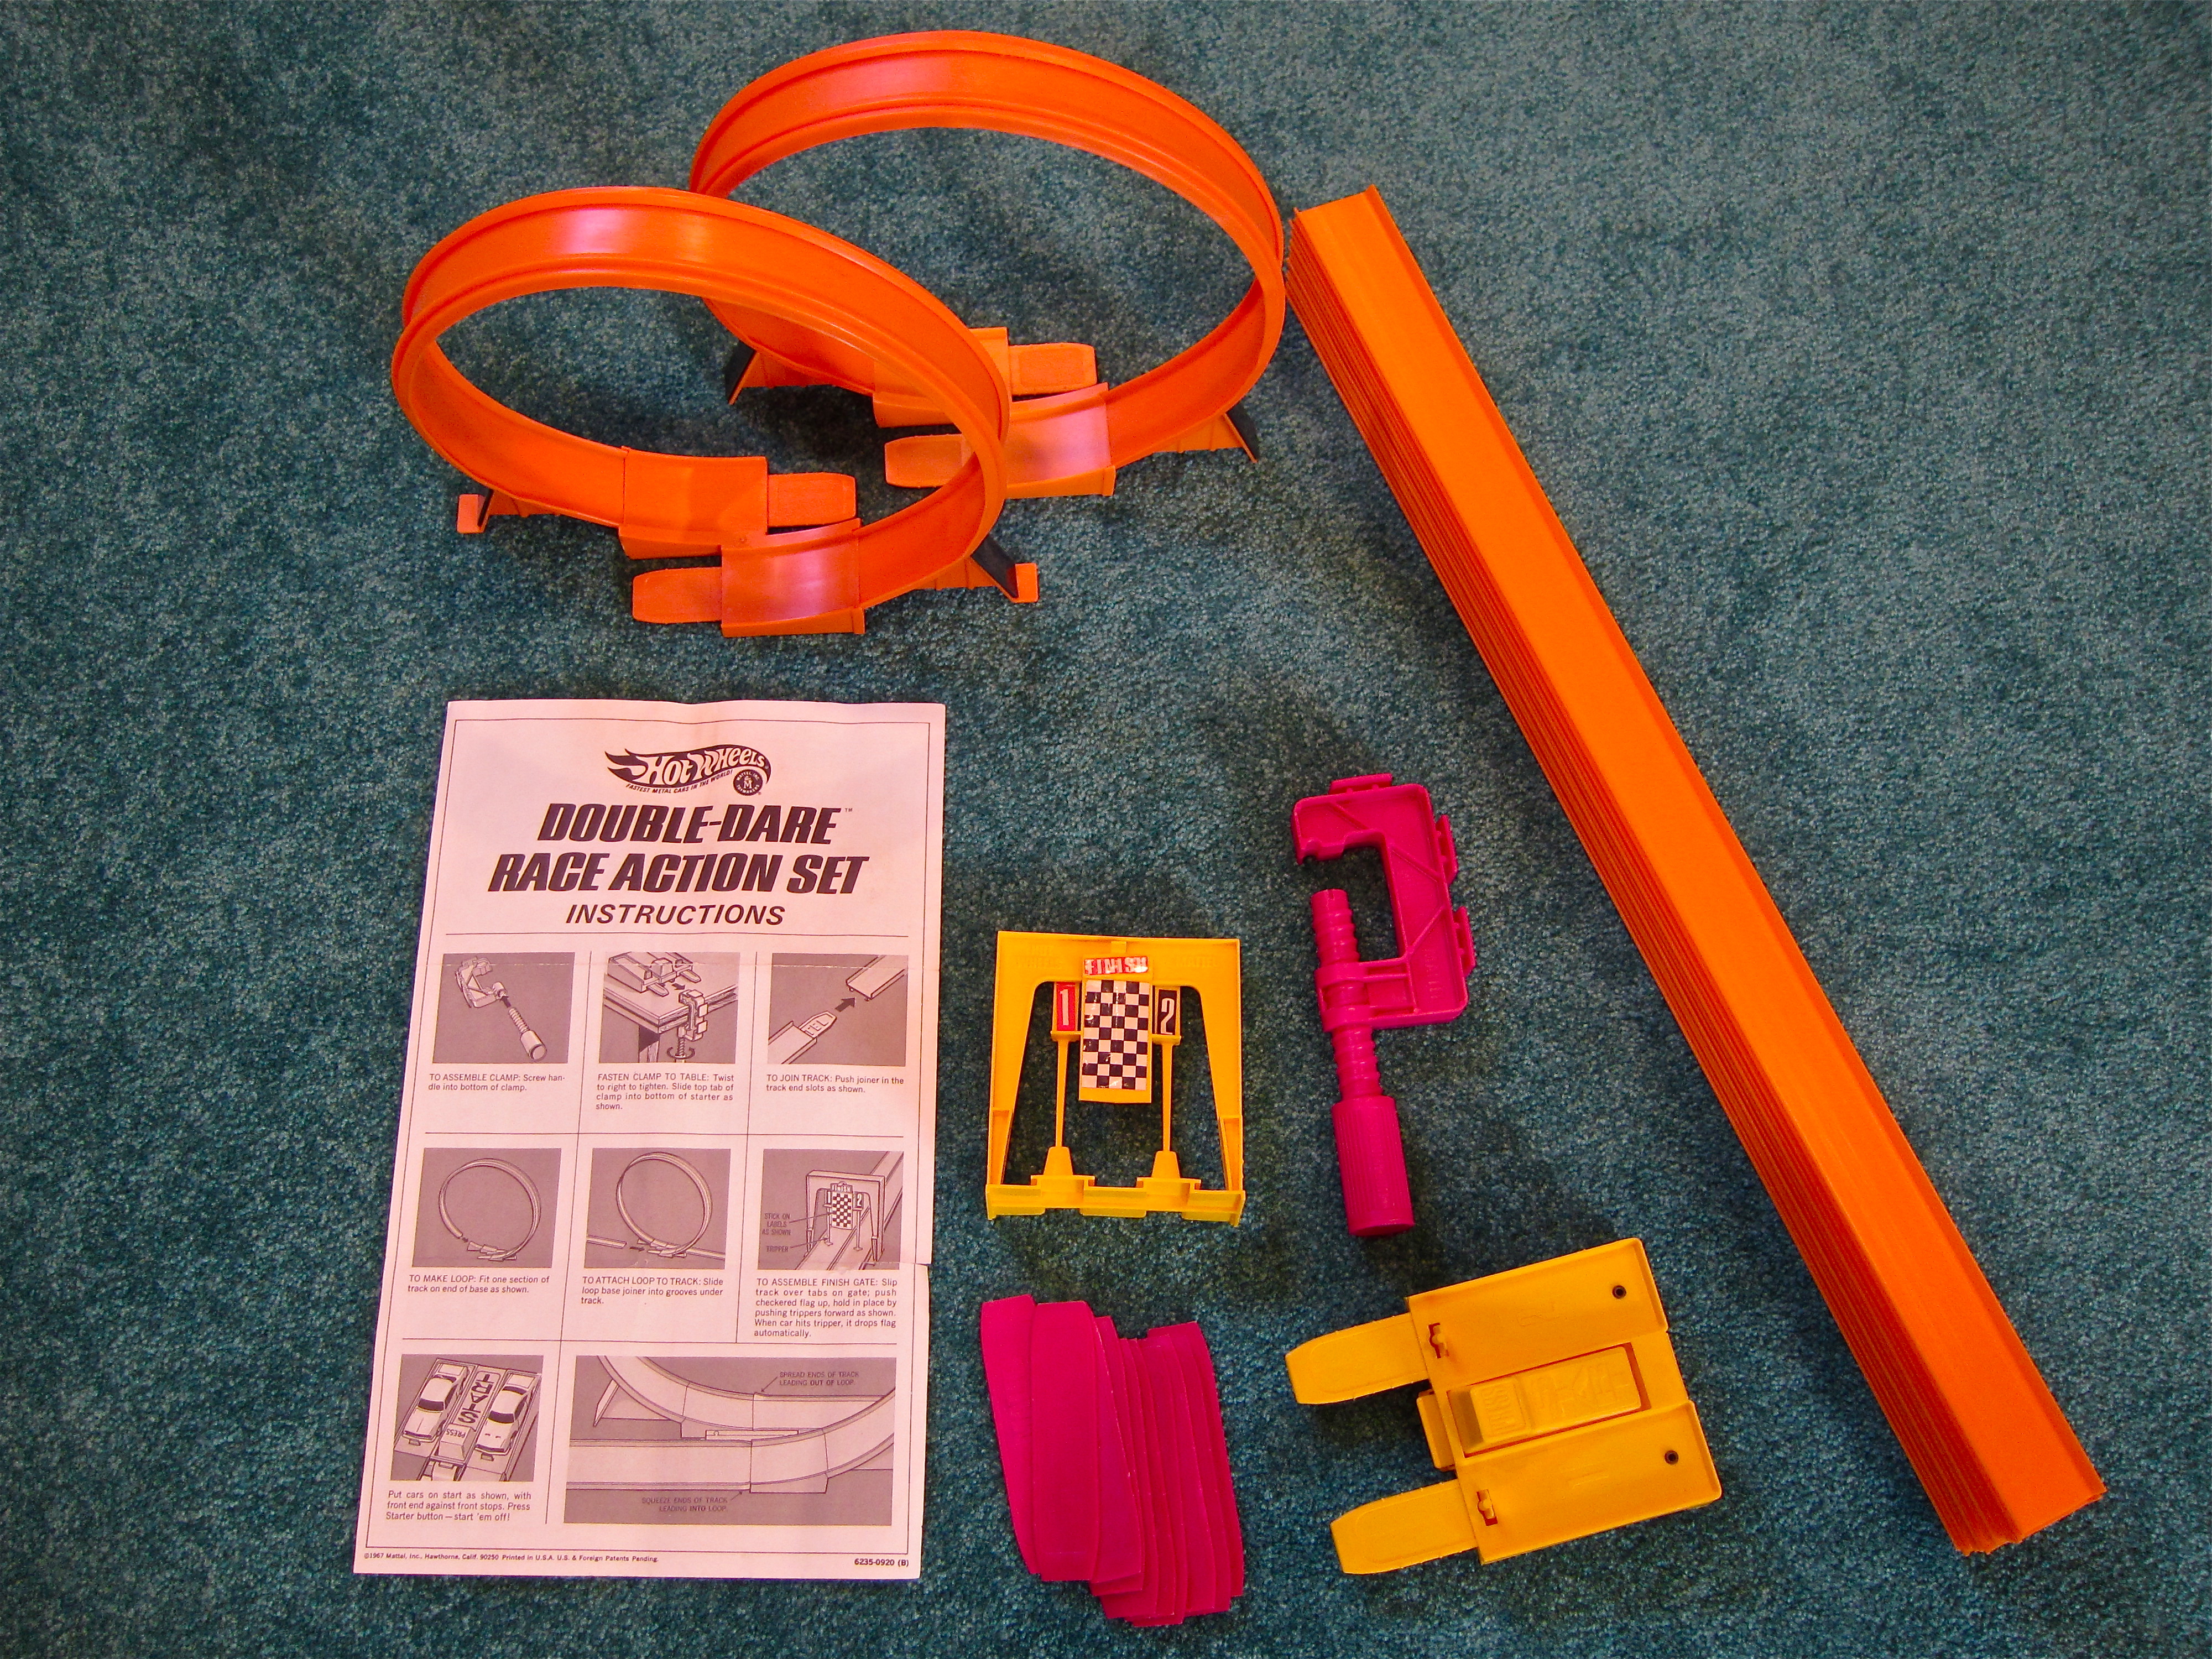 hot wheels table clamp